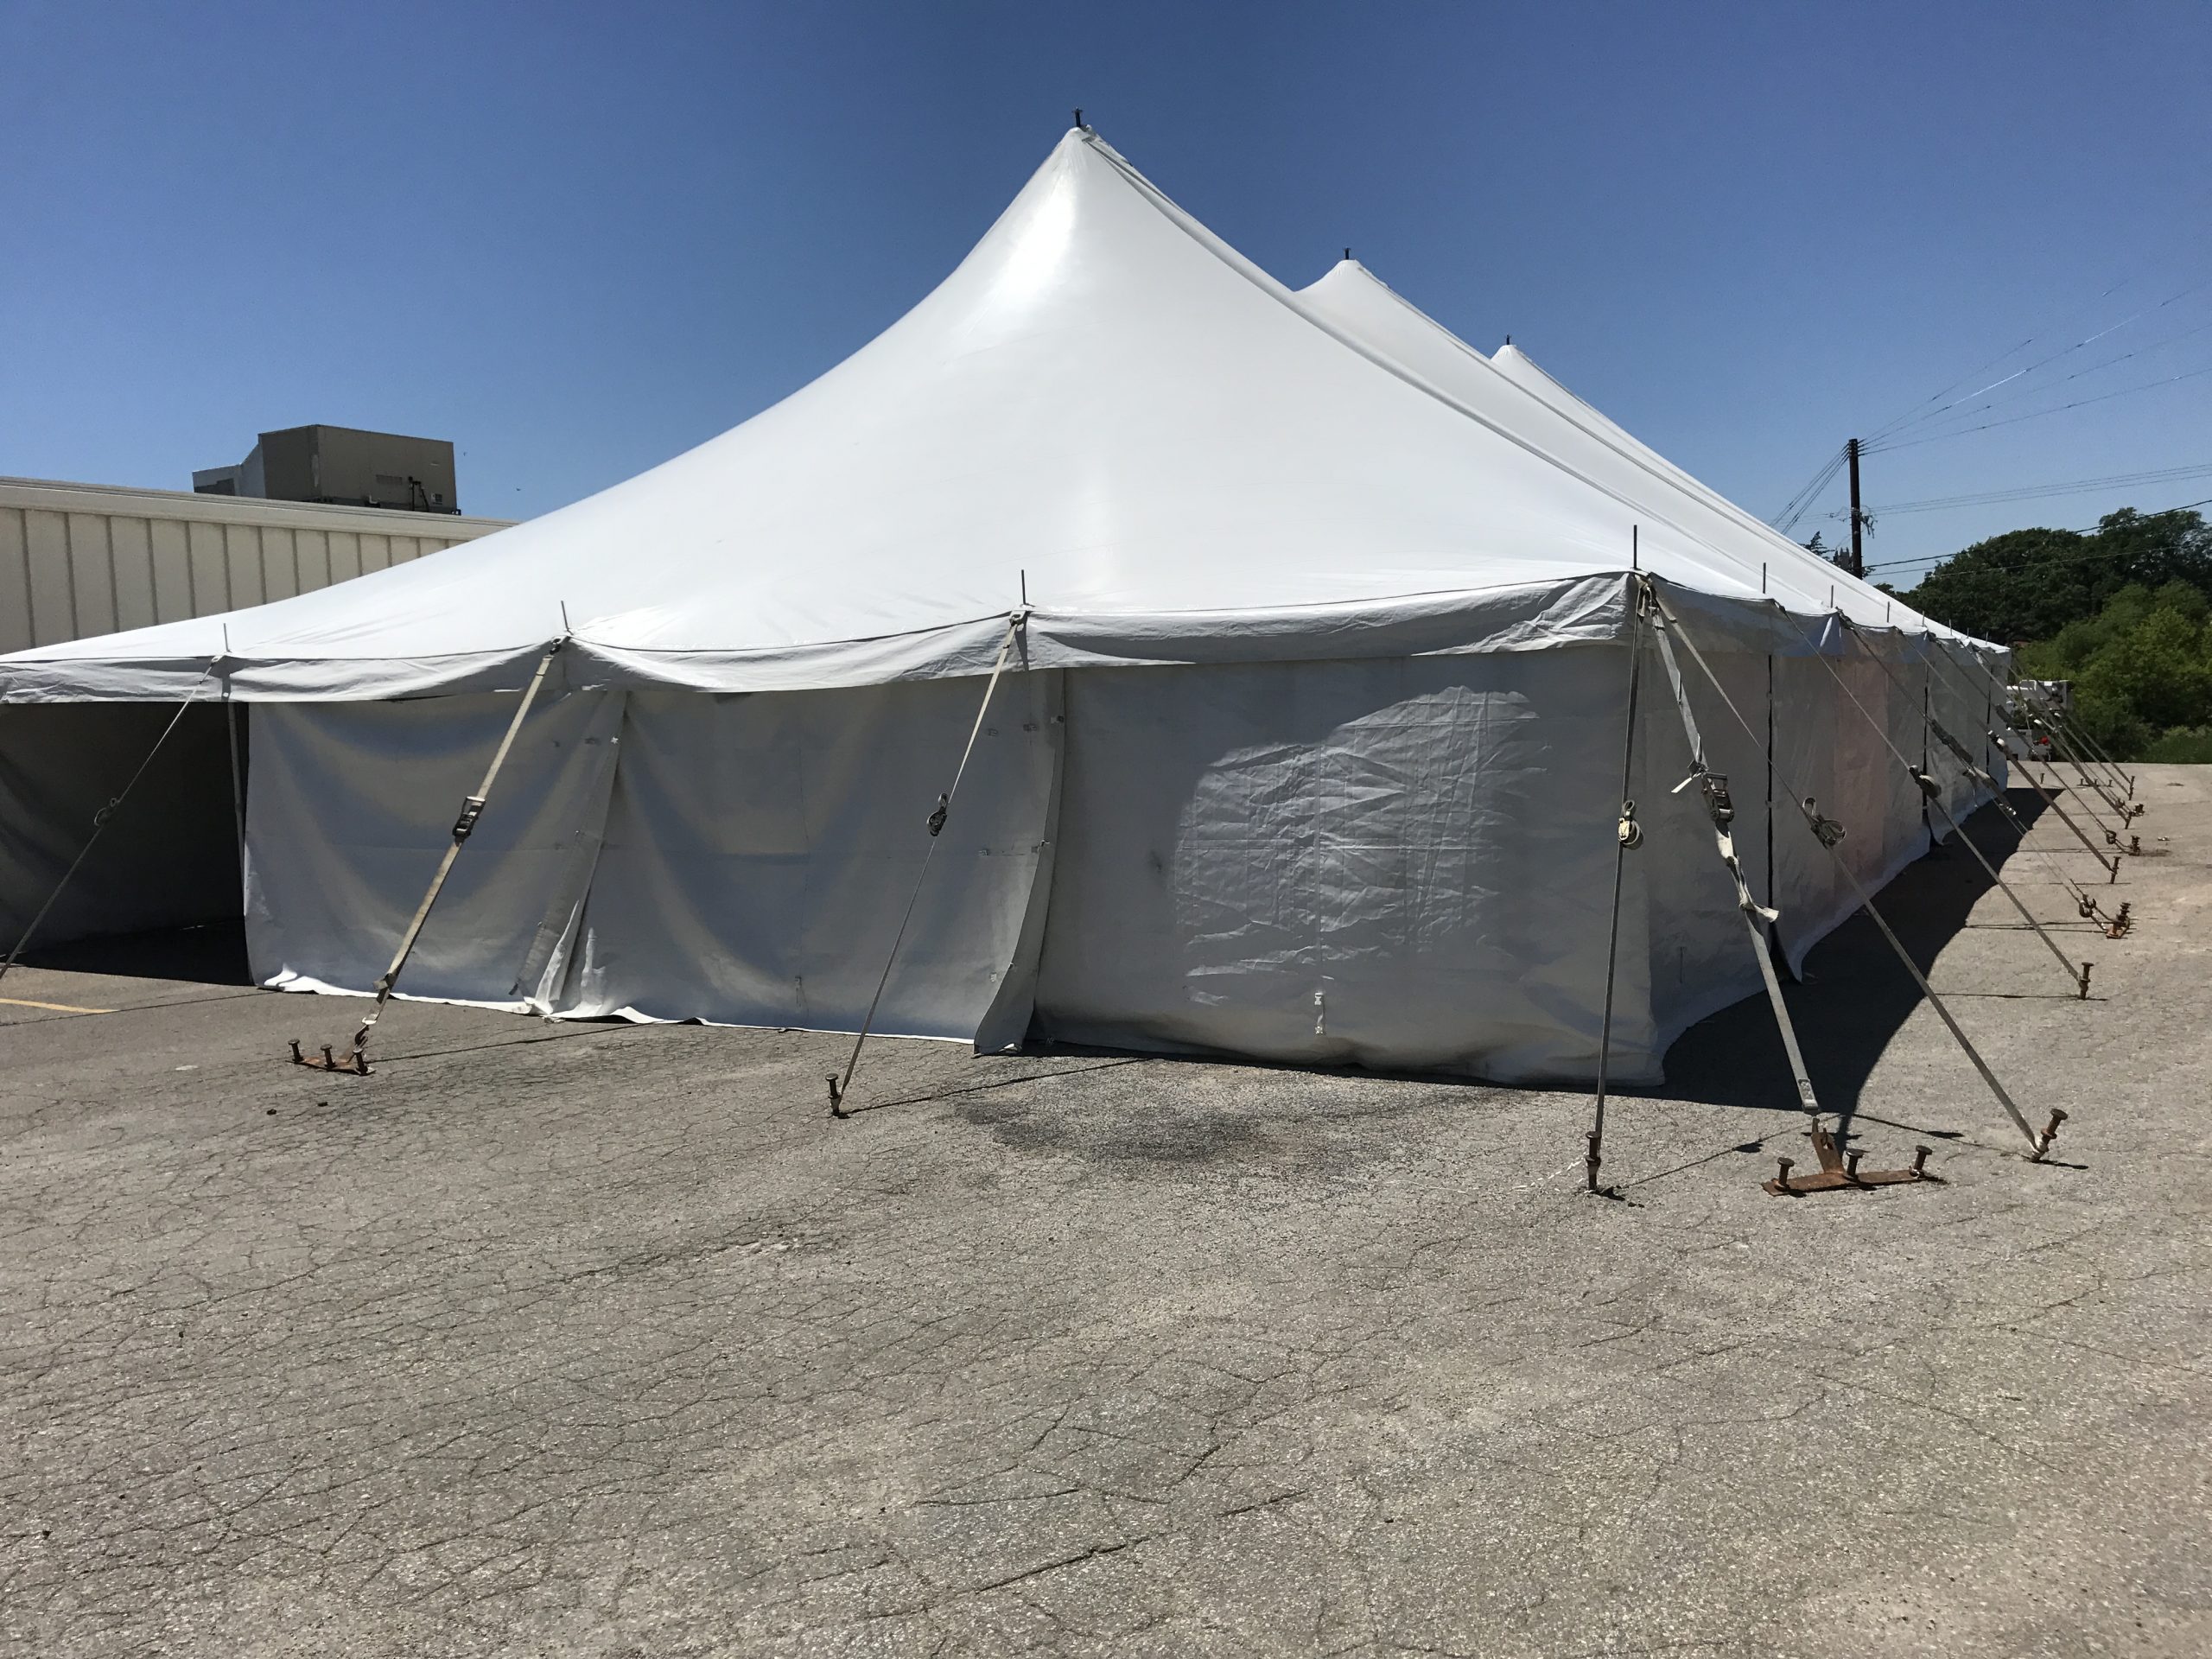 Large furniture sale under our 40' x 80' rope and pole tent at Store for Homes in Newton, Iowa